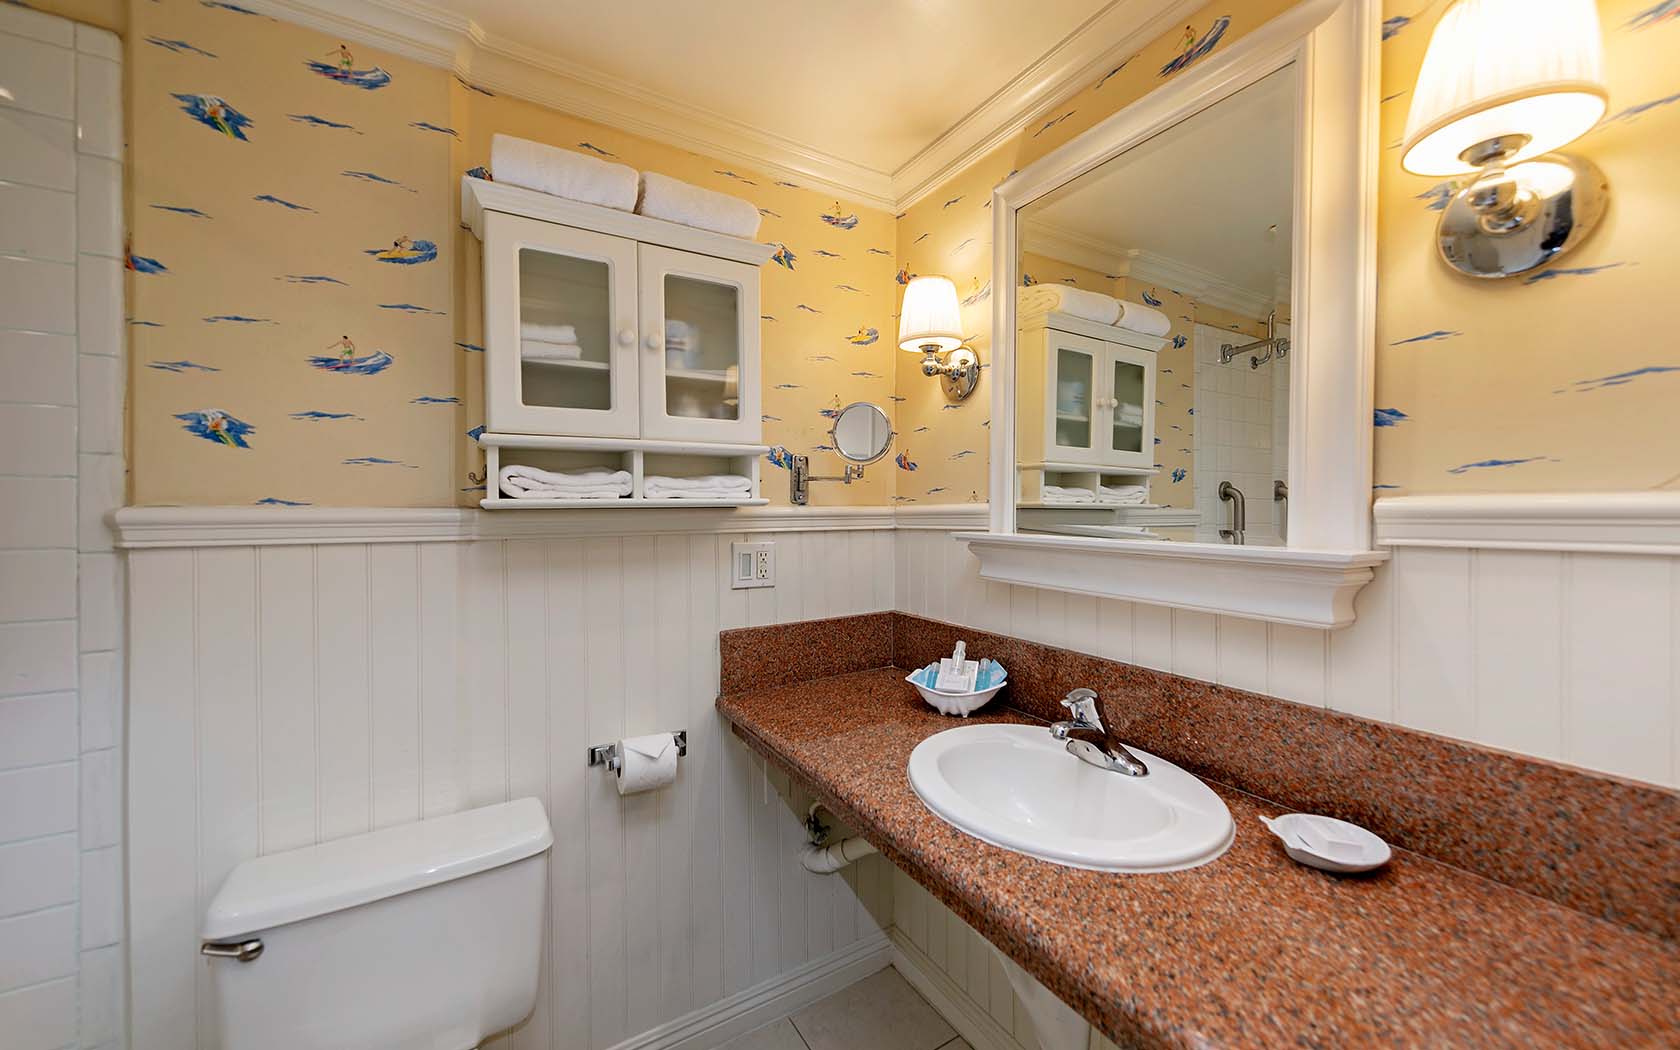 bathroom of property with old world traditional furniture